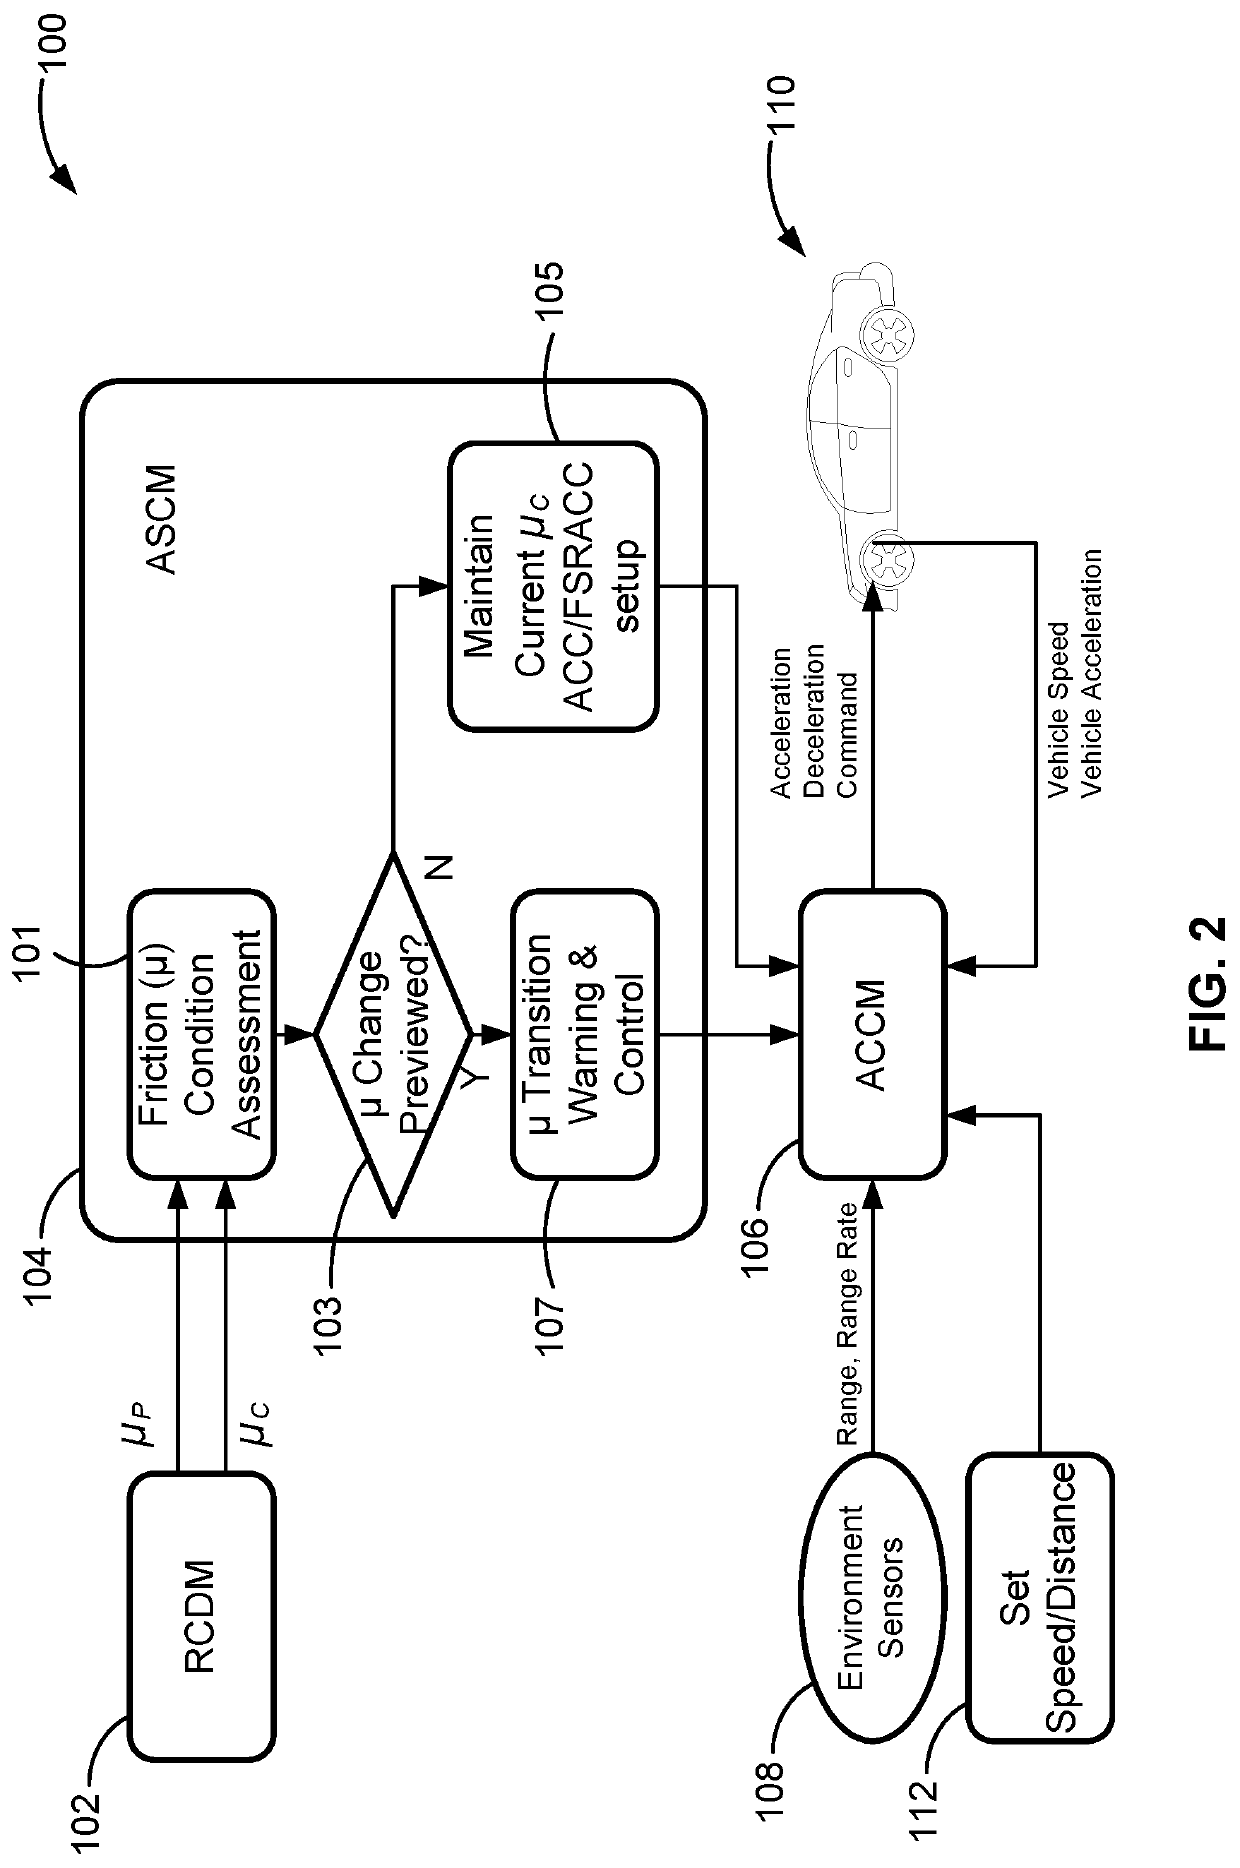 Automated driving systems and control logic with enhanced longitudinal control for transitional surface friction conditions